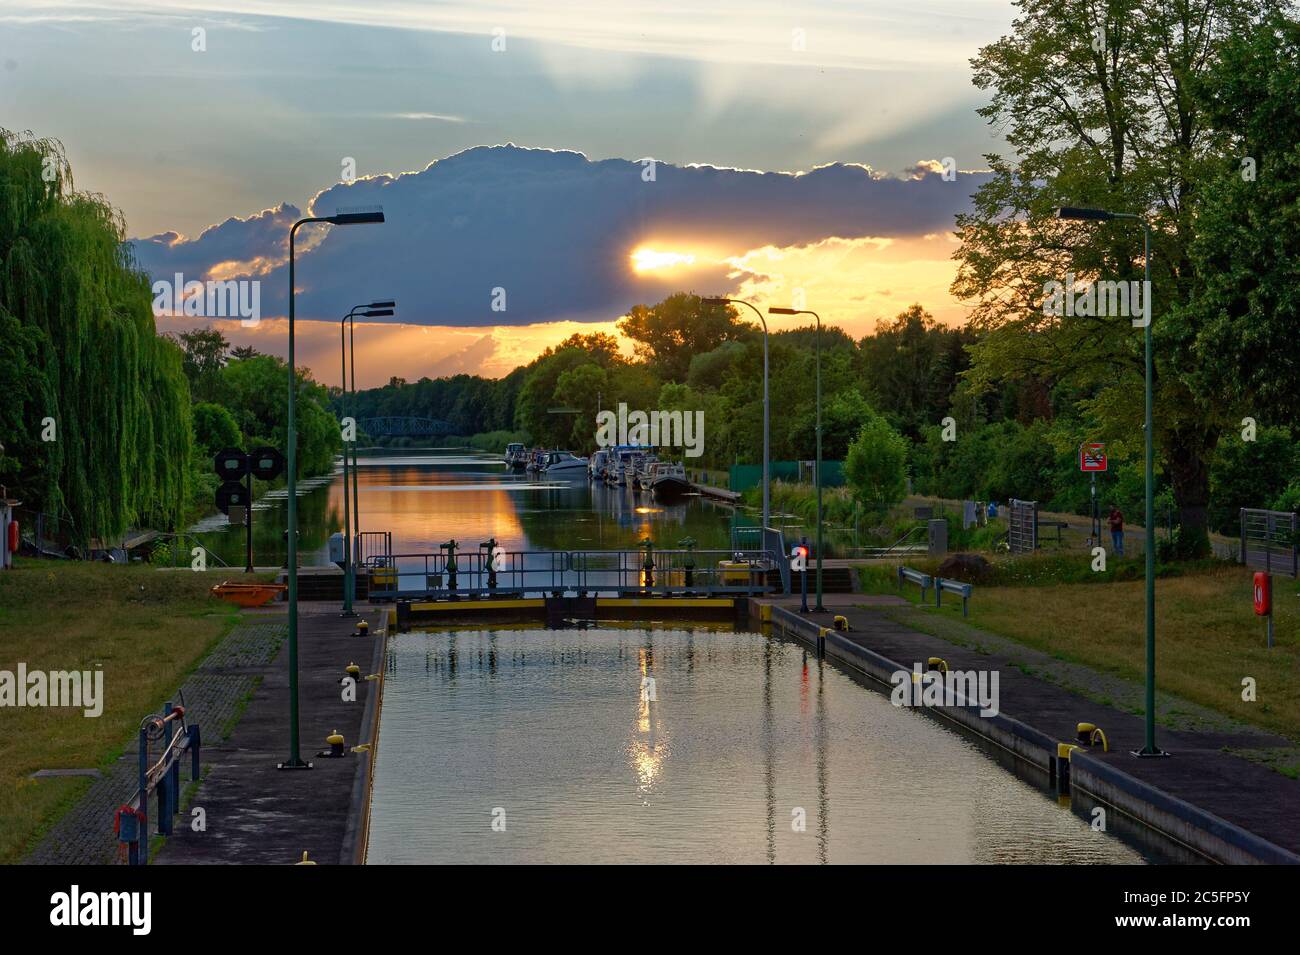 Sunset at Limmer Schleuse by Continental Limmer. Stock Photo